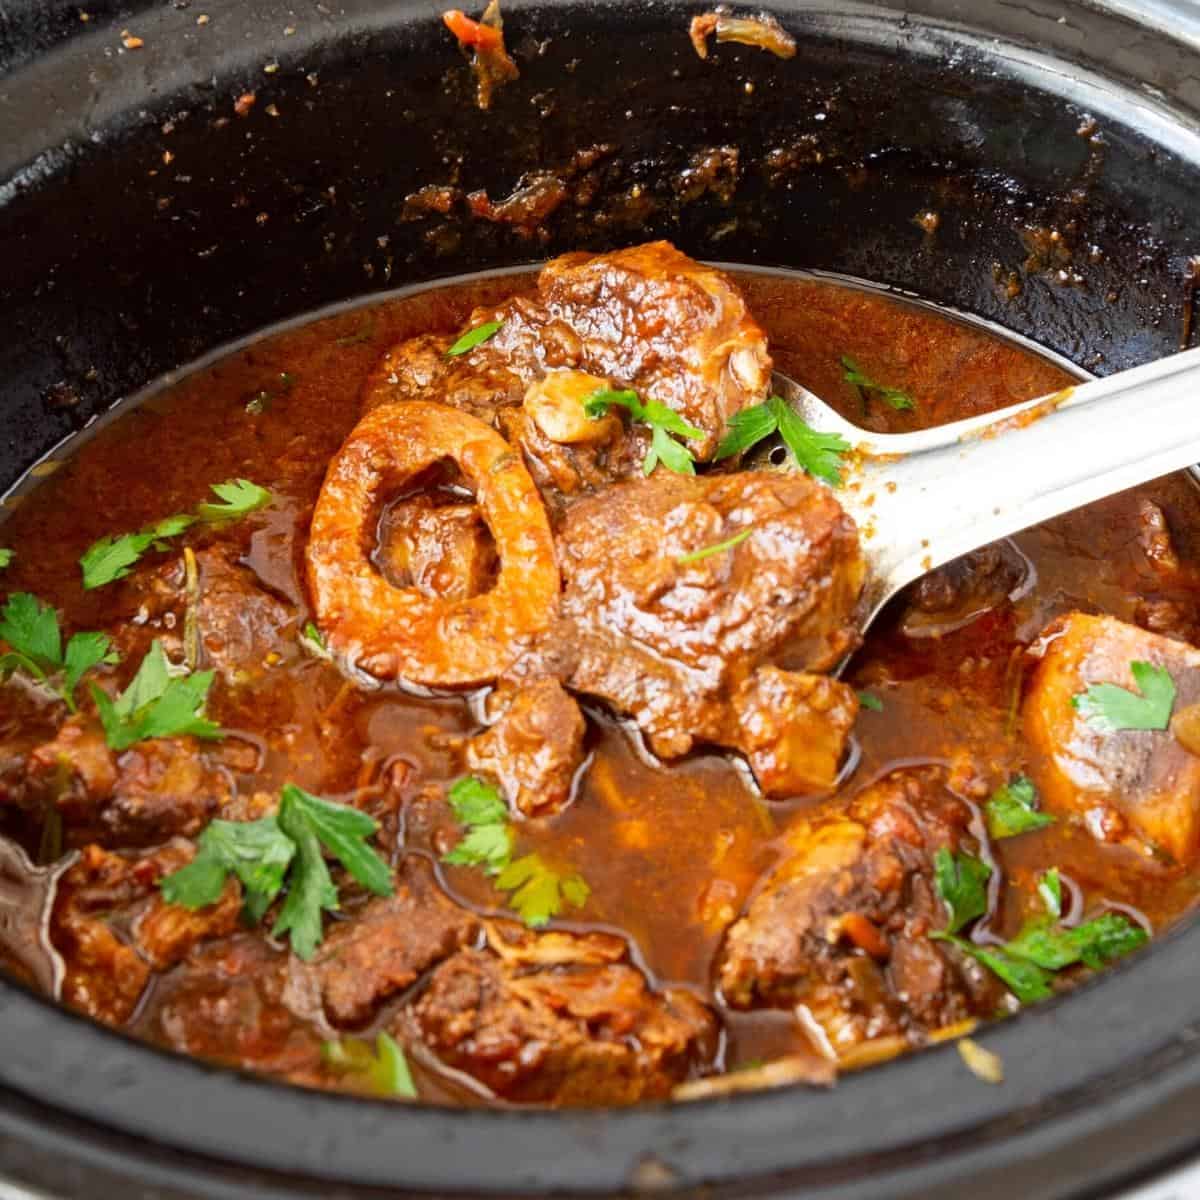 A slow cooker with shanks.